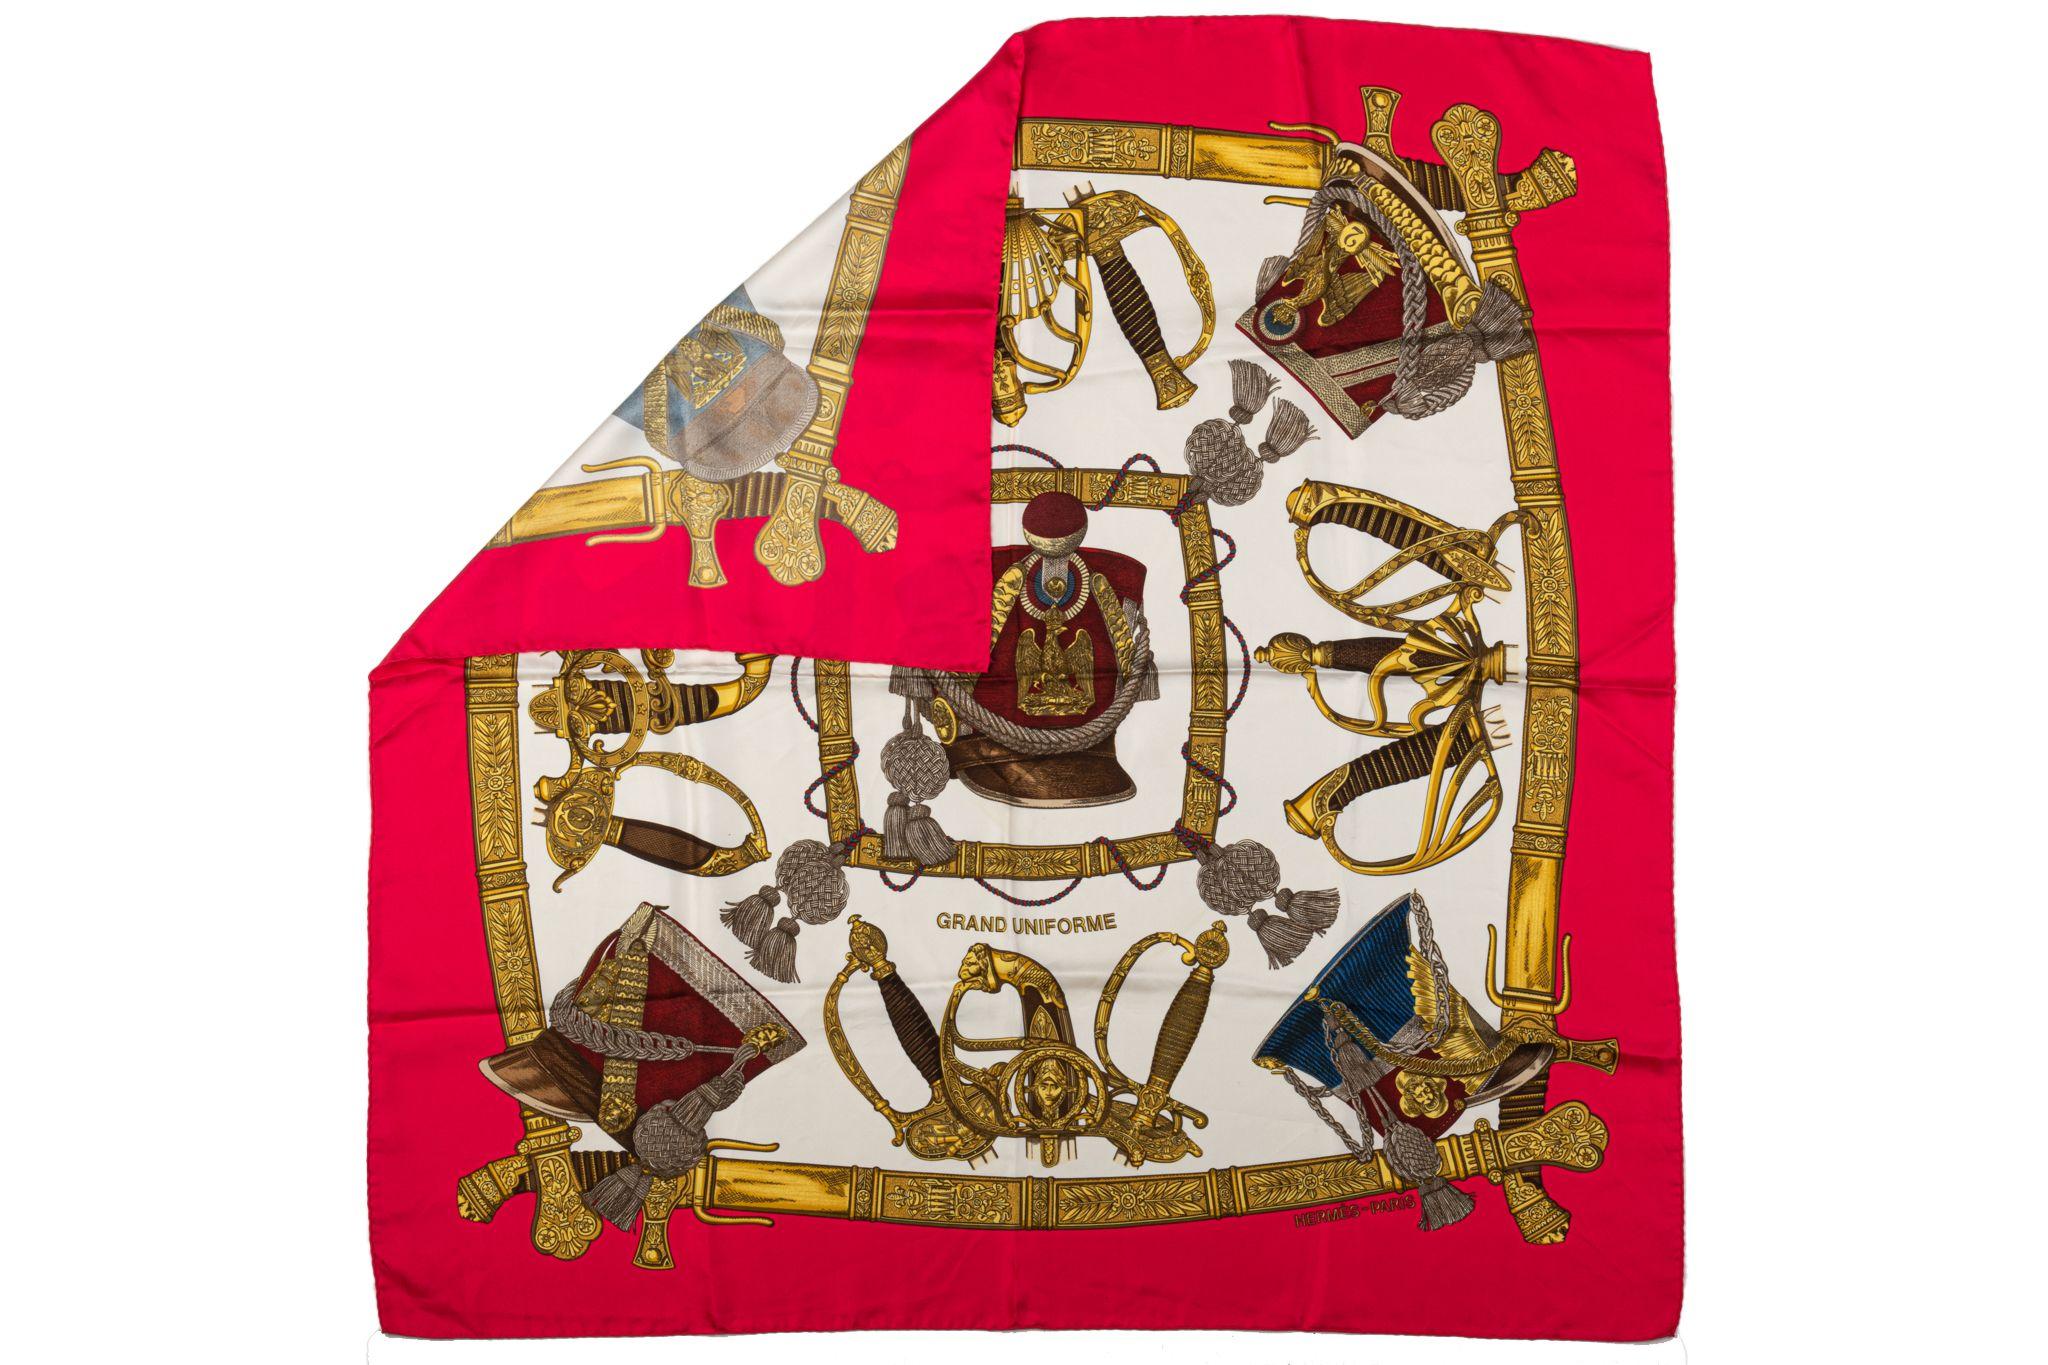 Hermès vibrant red Grand Uniforme silk twill scarf designed by coveted designer Metz. Depicts military head wear and swords. Hand-rolled edges. Does not include box. Minor wear. No care tag.